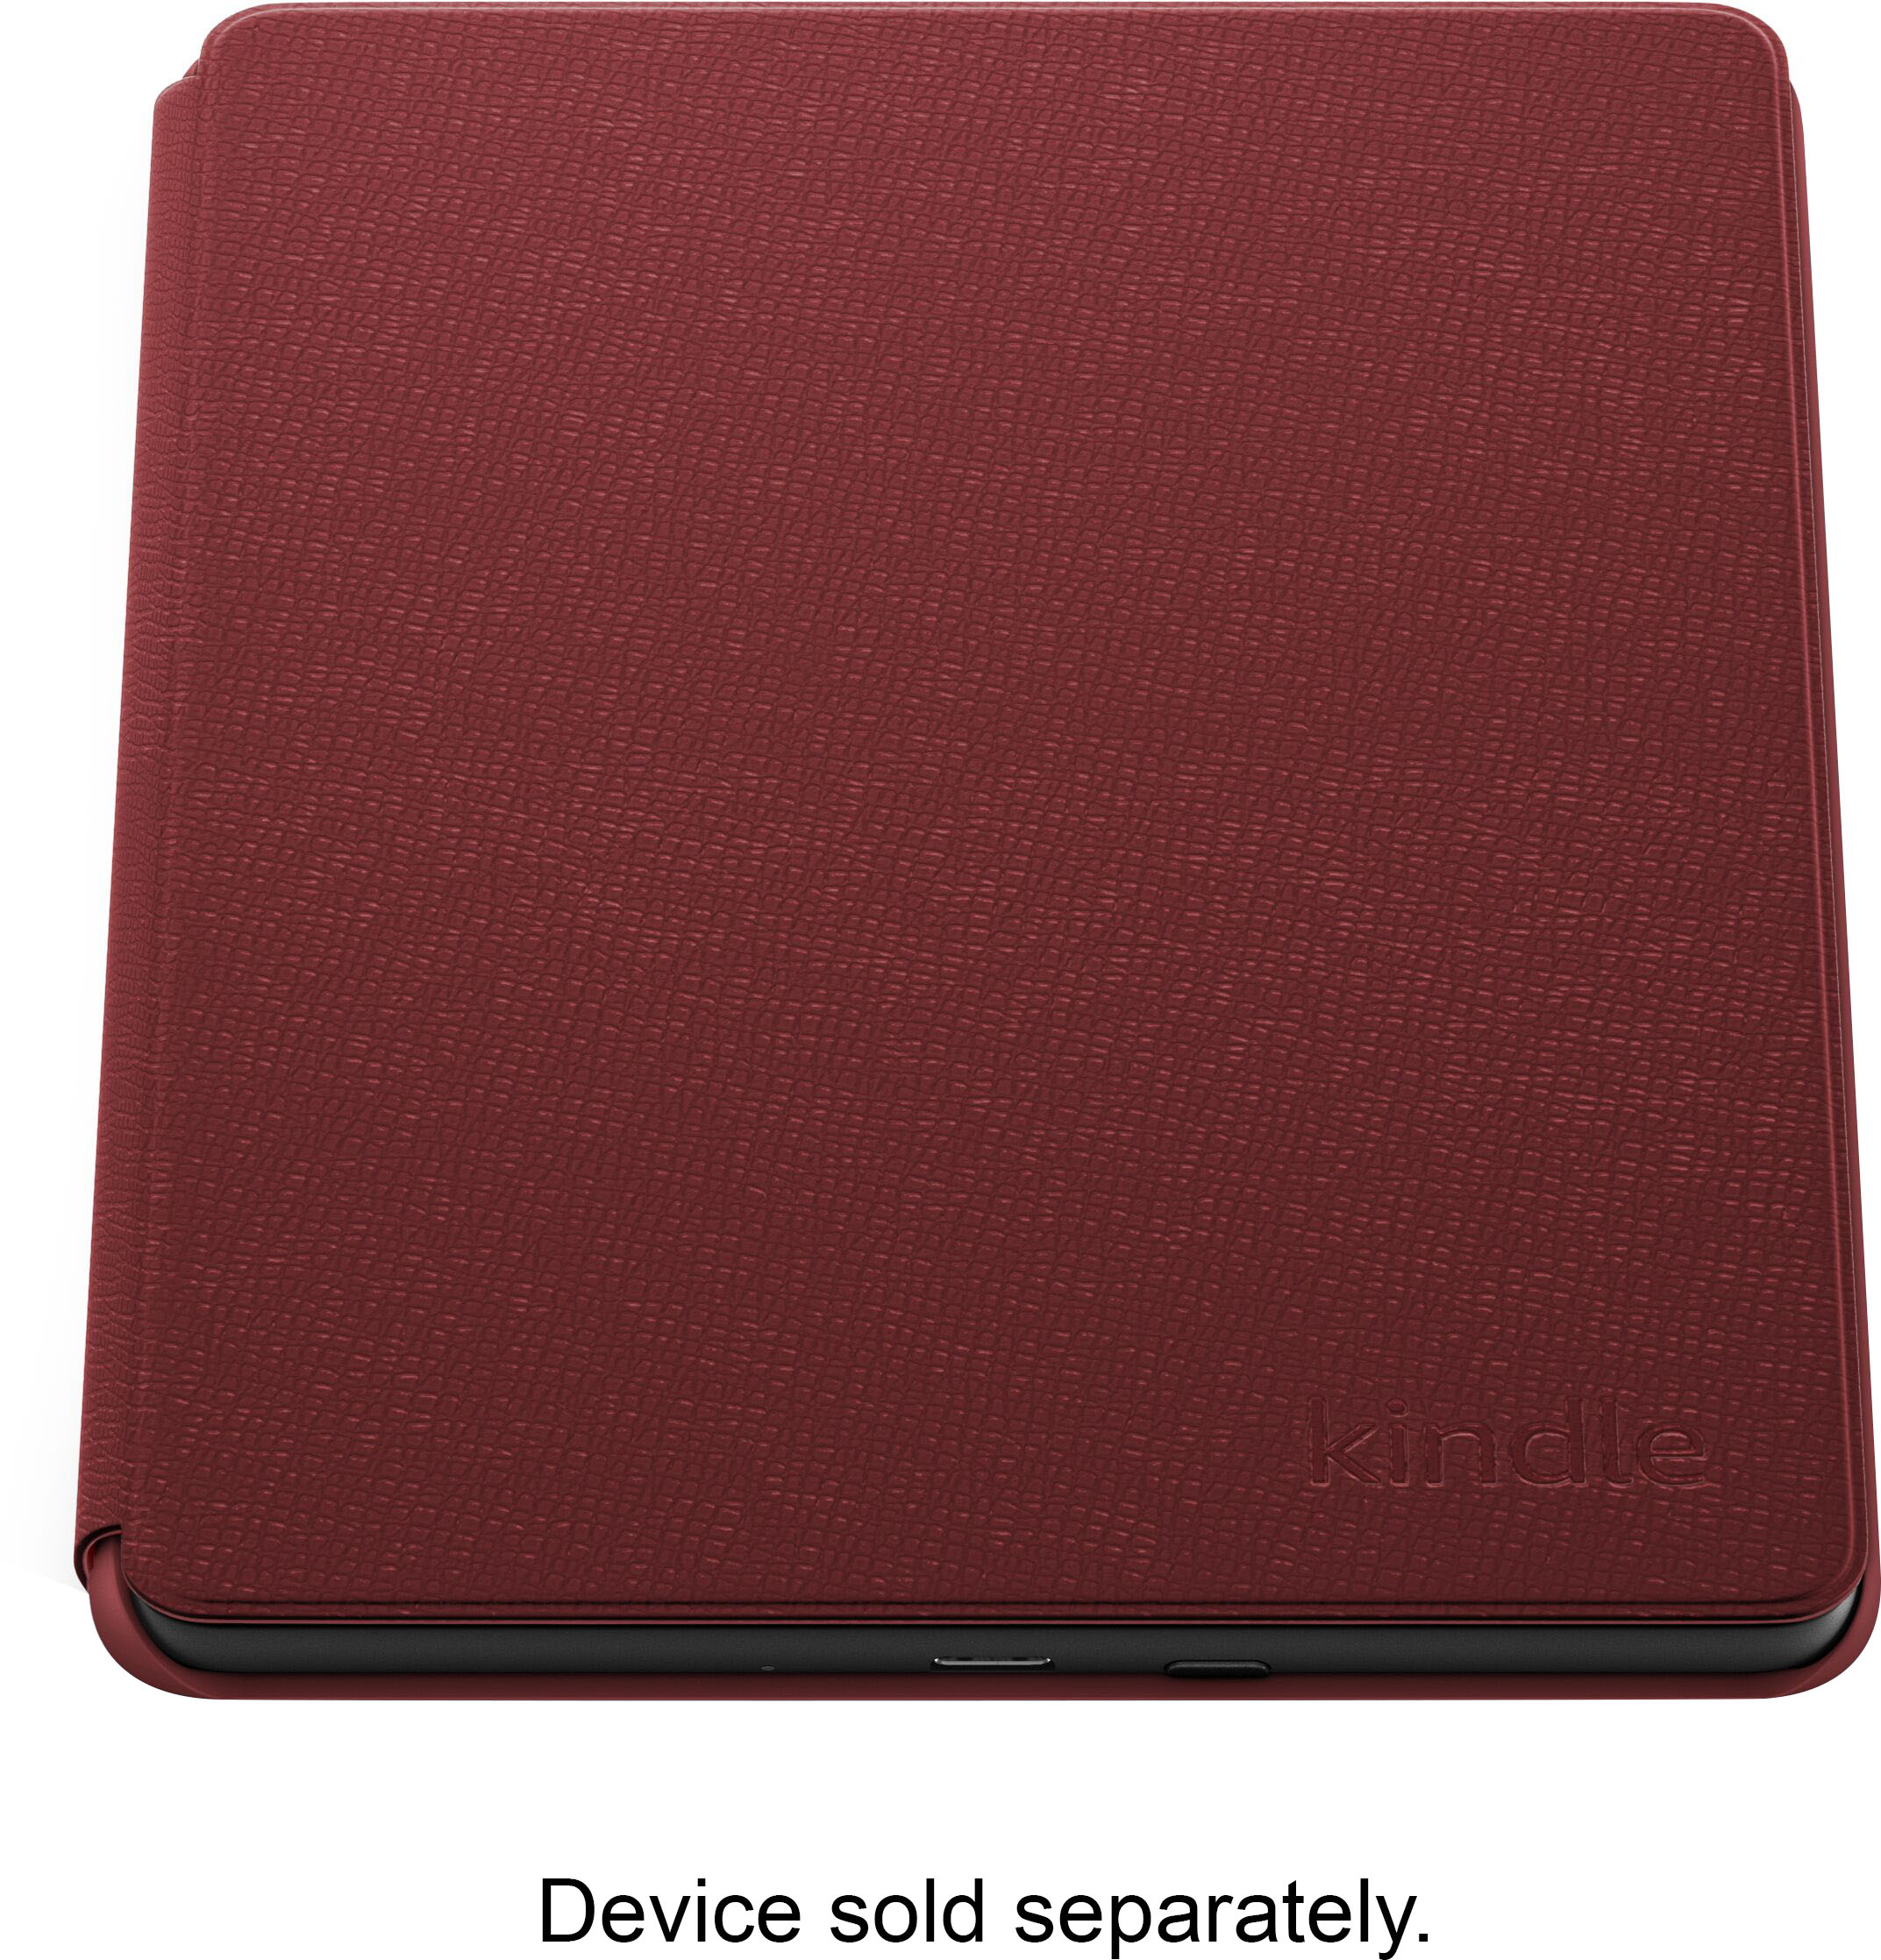 Kindle B08VZR6F2M Paperwhite Leather Cover 11th Gen Merlo at The Good Guys